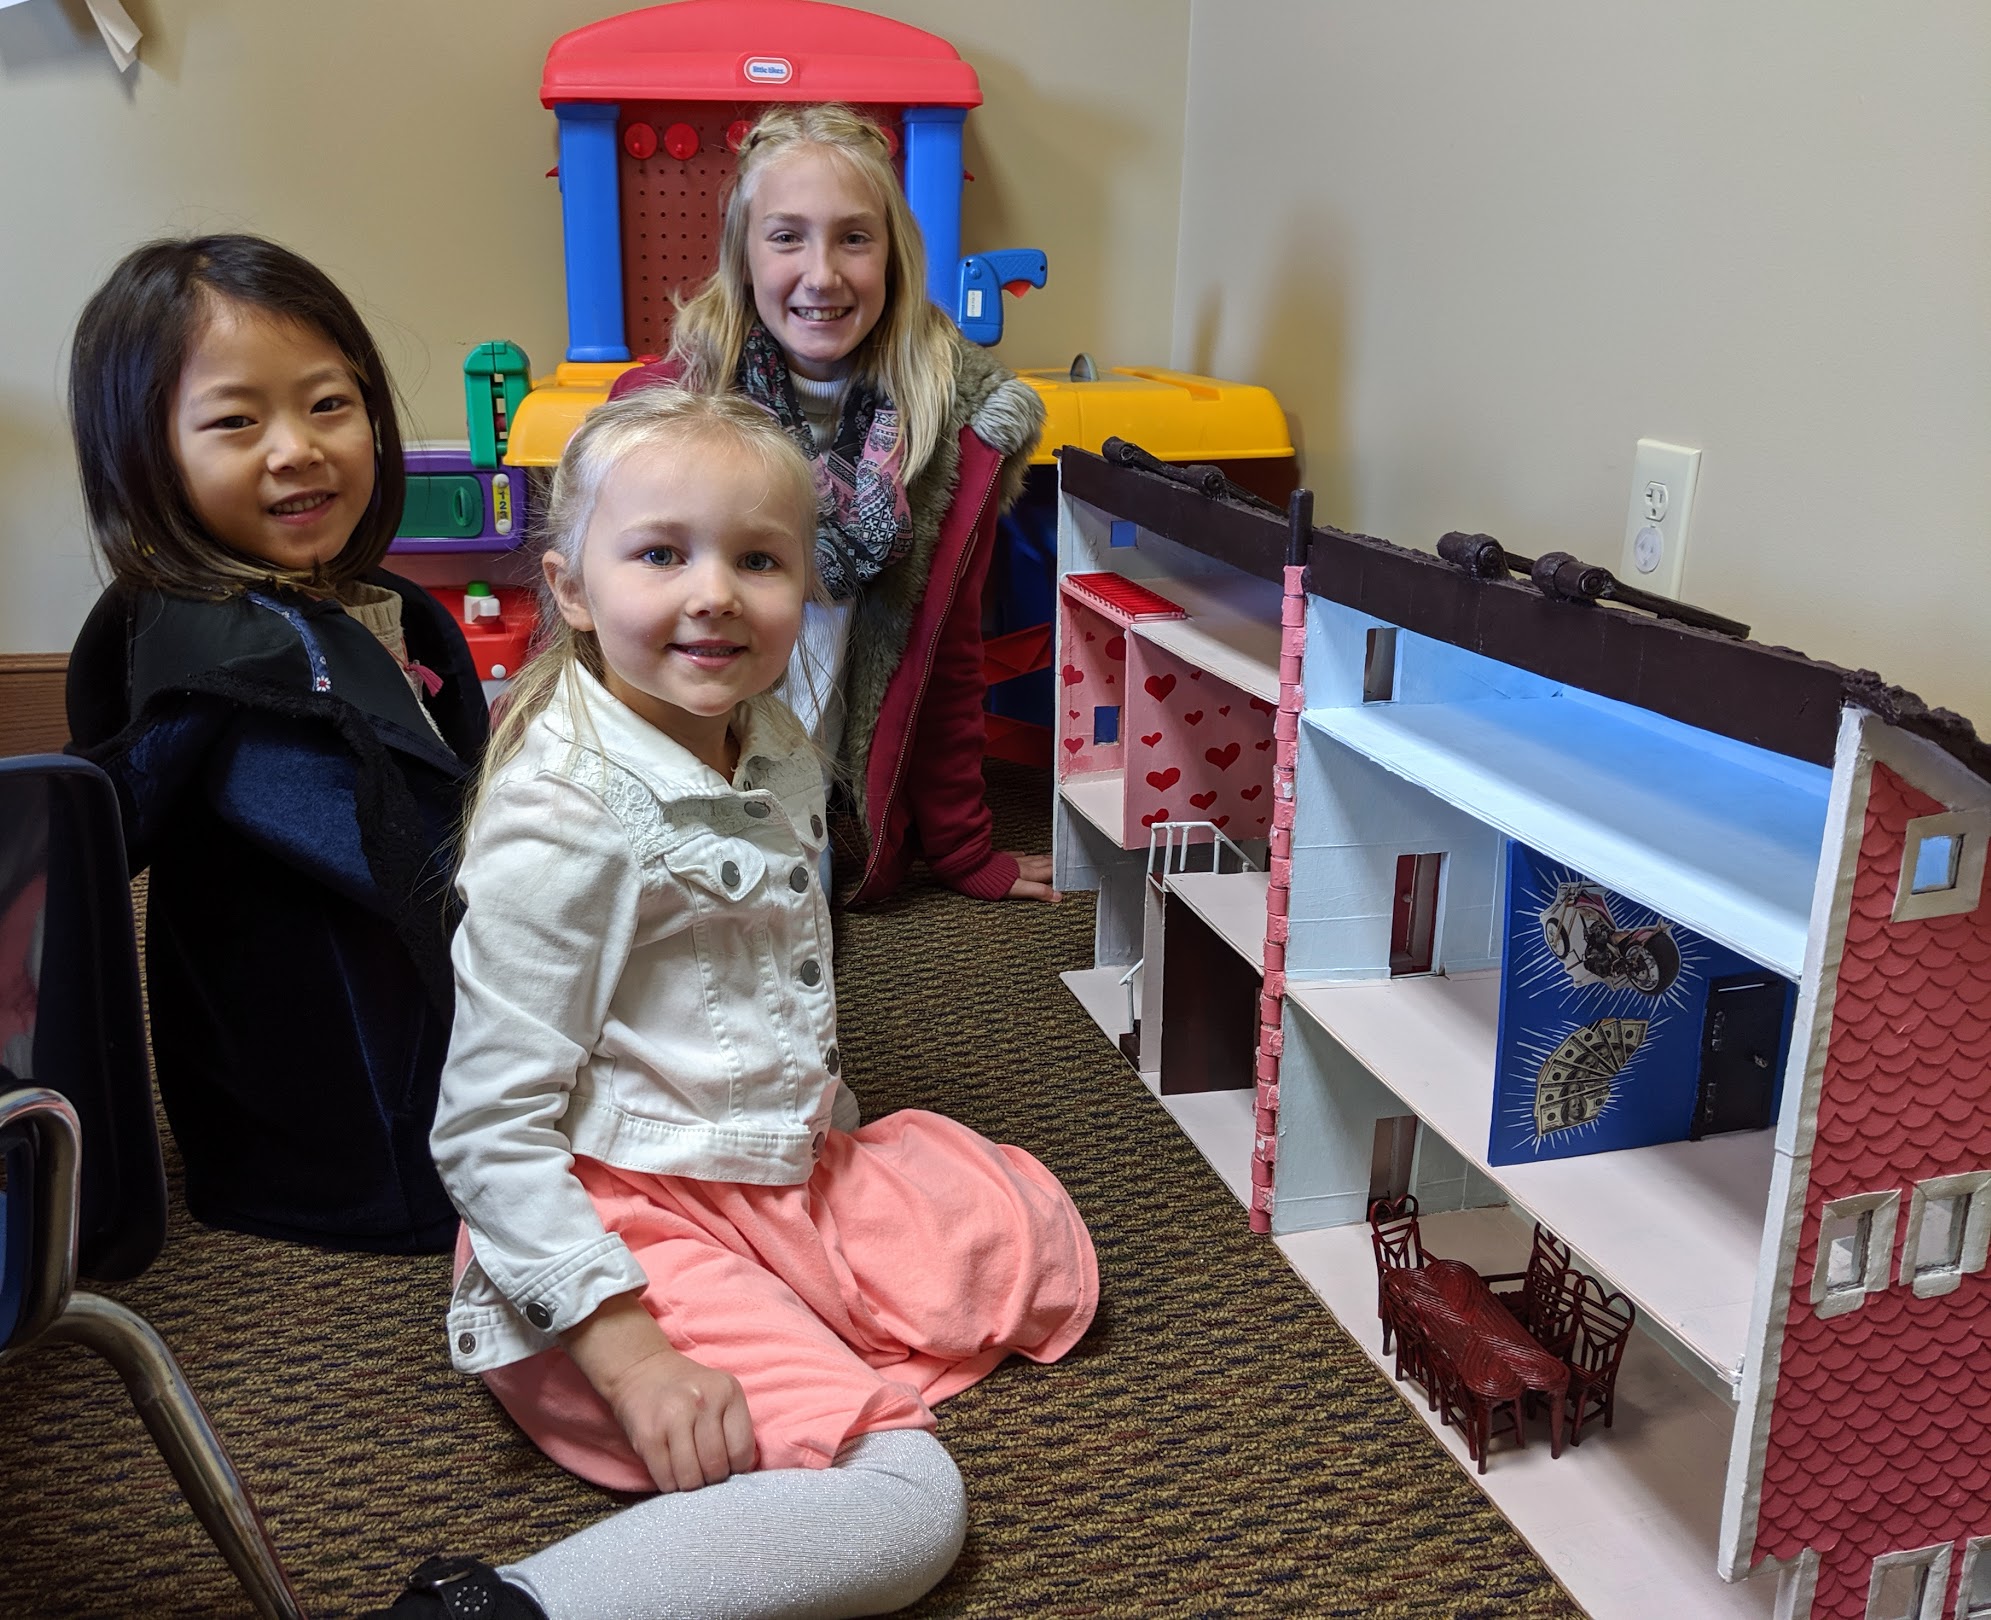 Kids playing with doll house